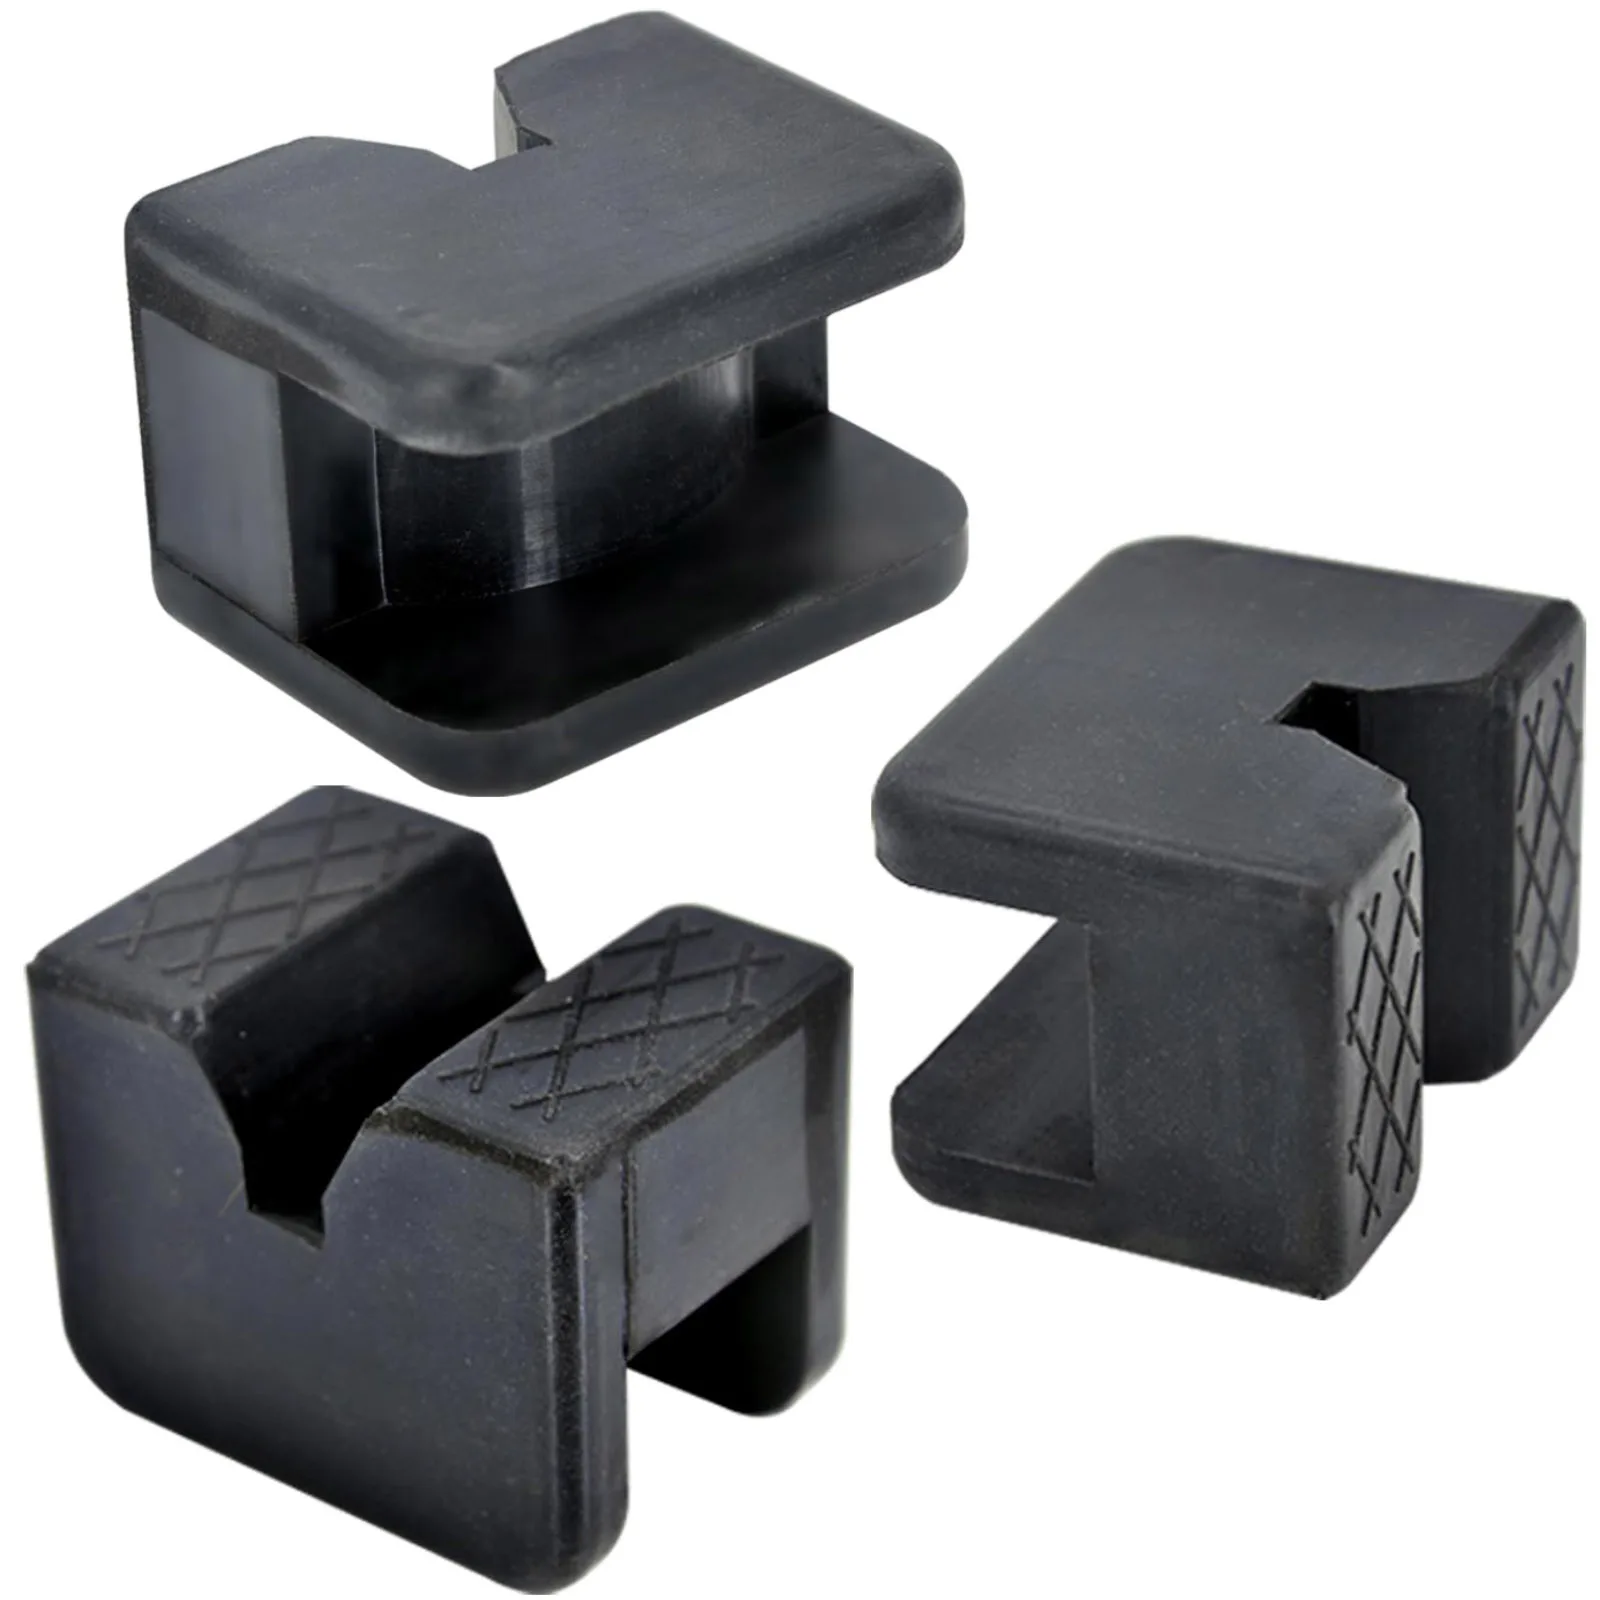 Universal Car Slotted Jack Stand Rubber Pads - Lift Safely for VW Toyota... - $17.29